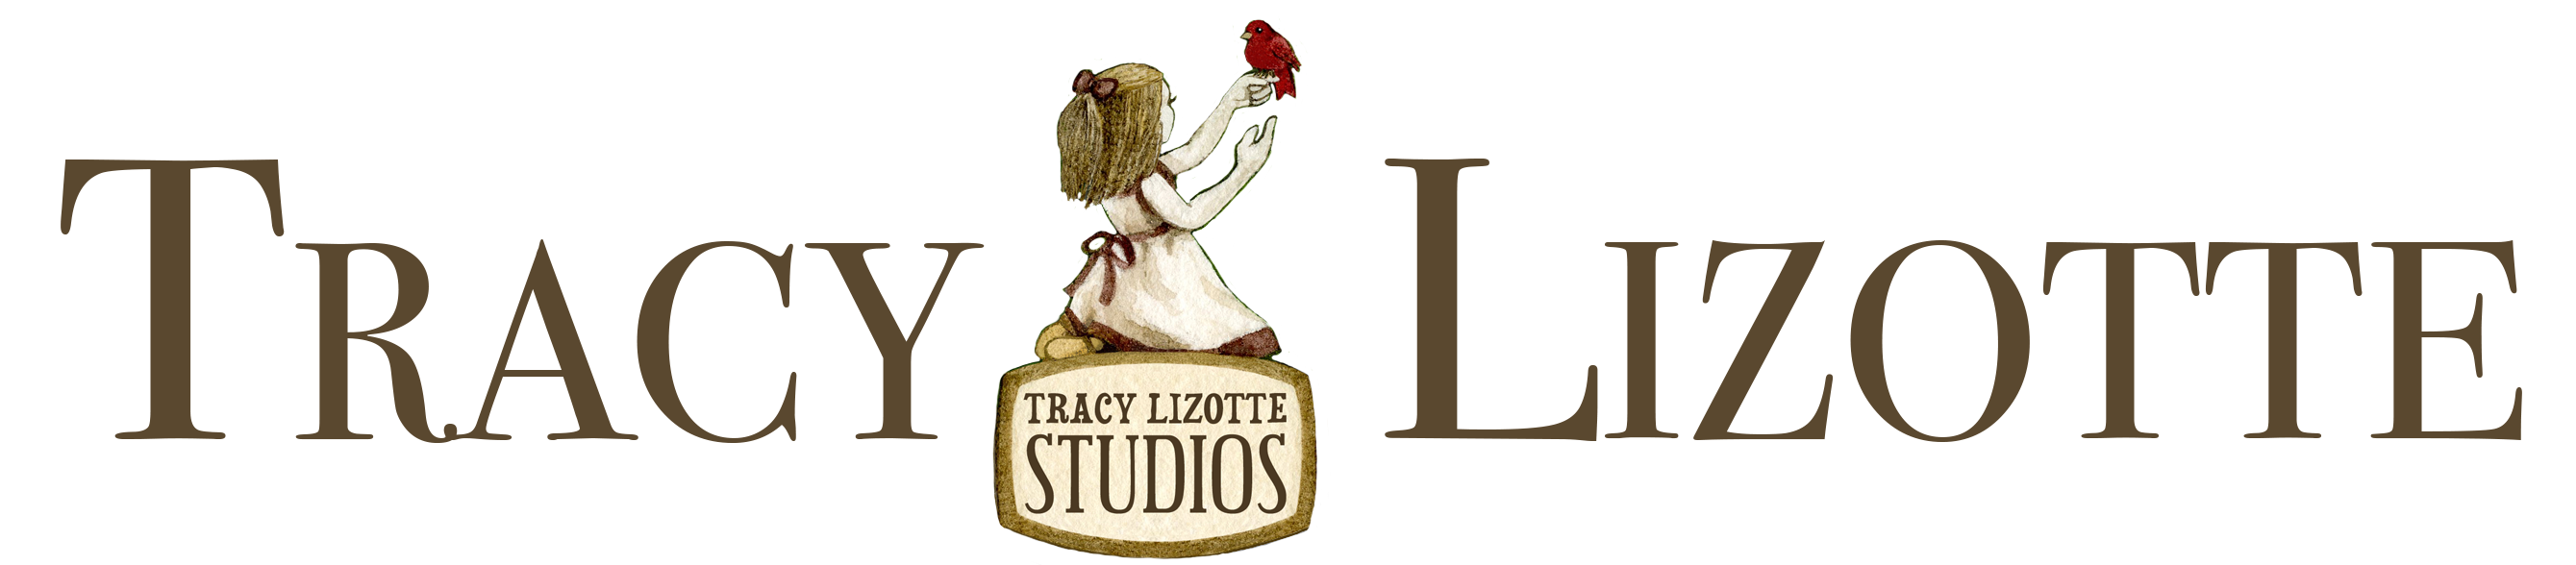 Tracy Lizotte - Website